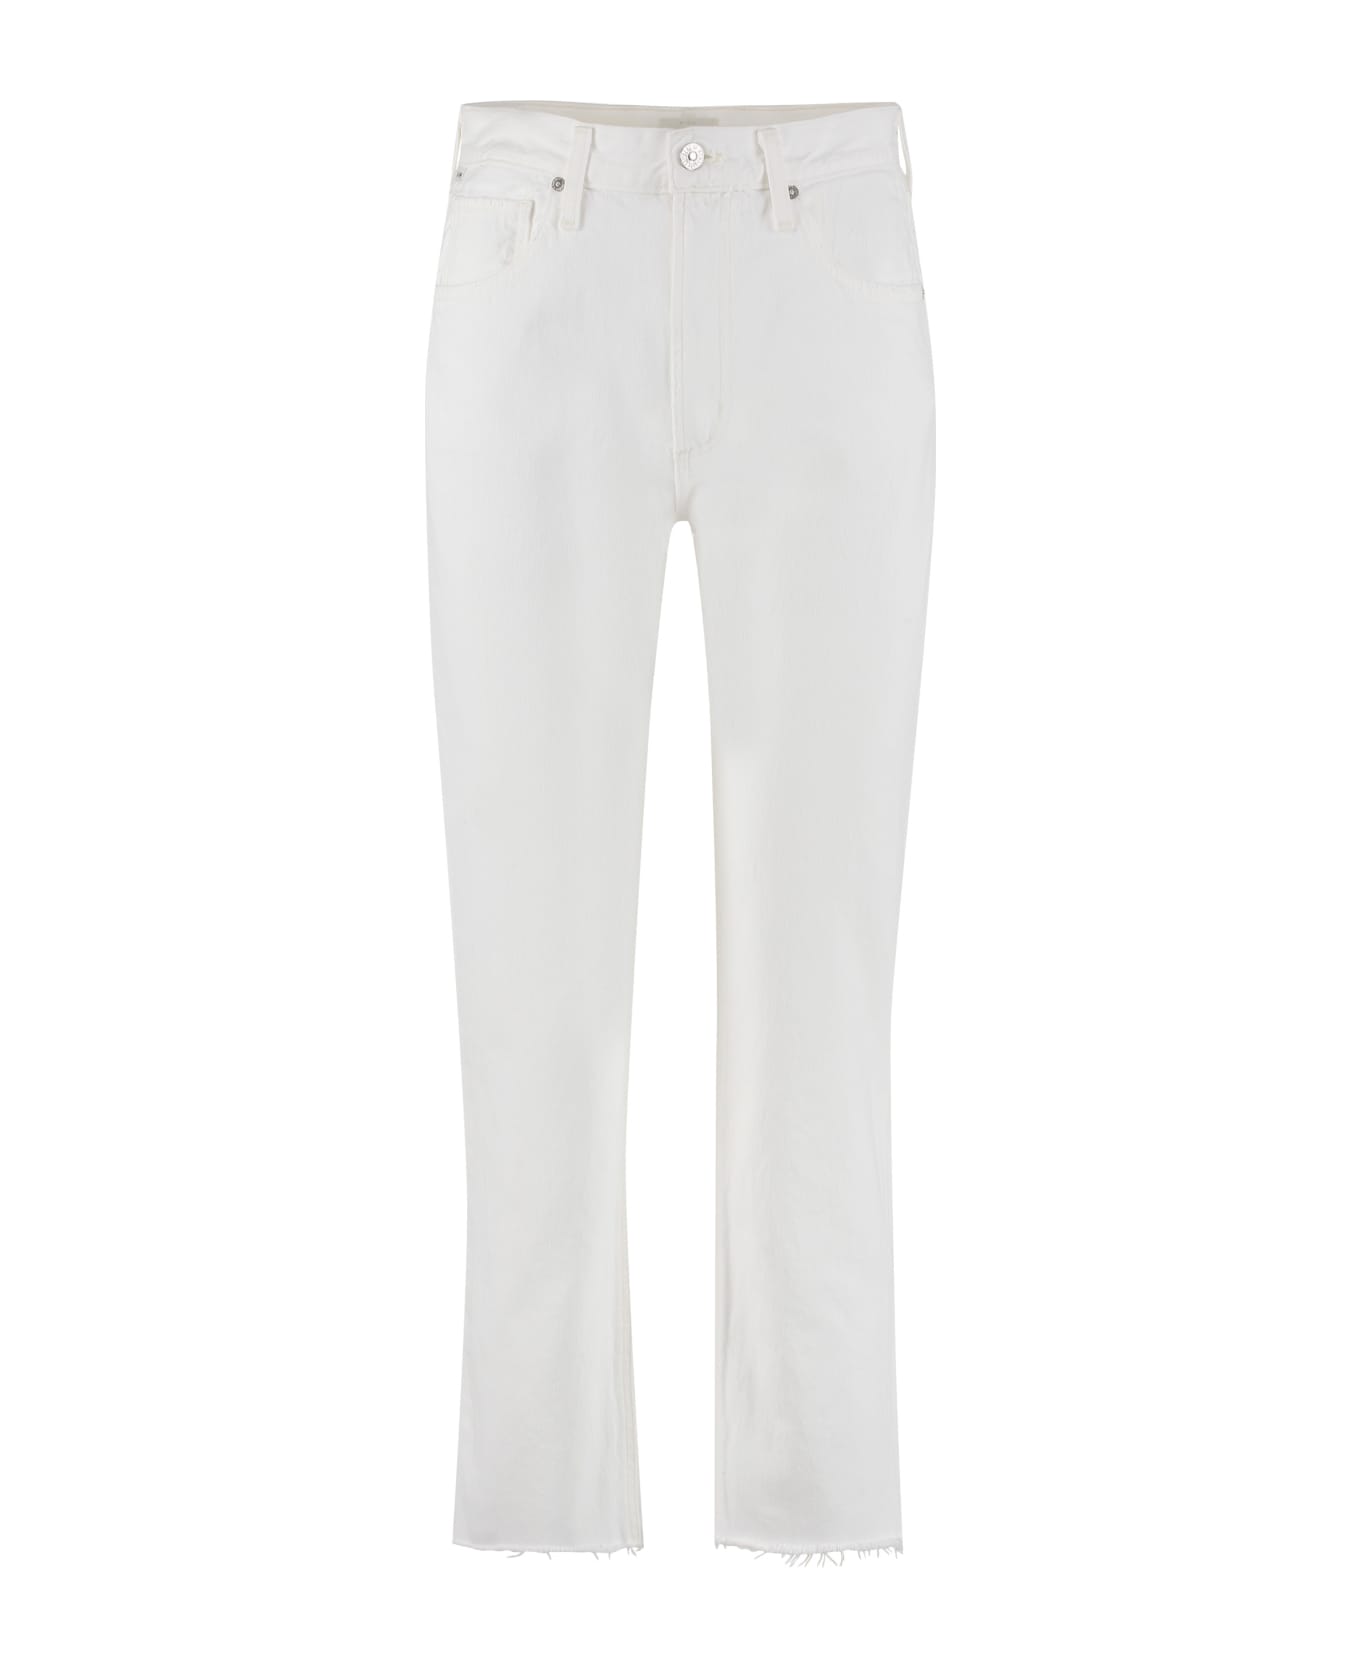 Citizens of Humanity Daphne Crop Stovepipe Jeans - White